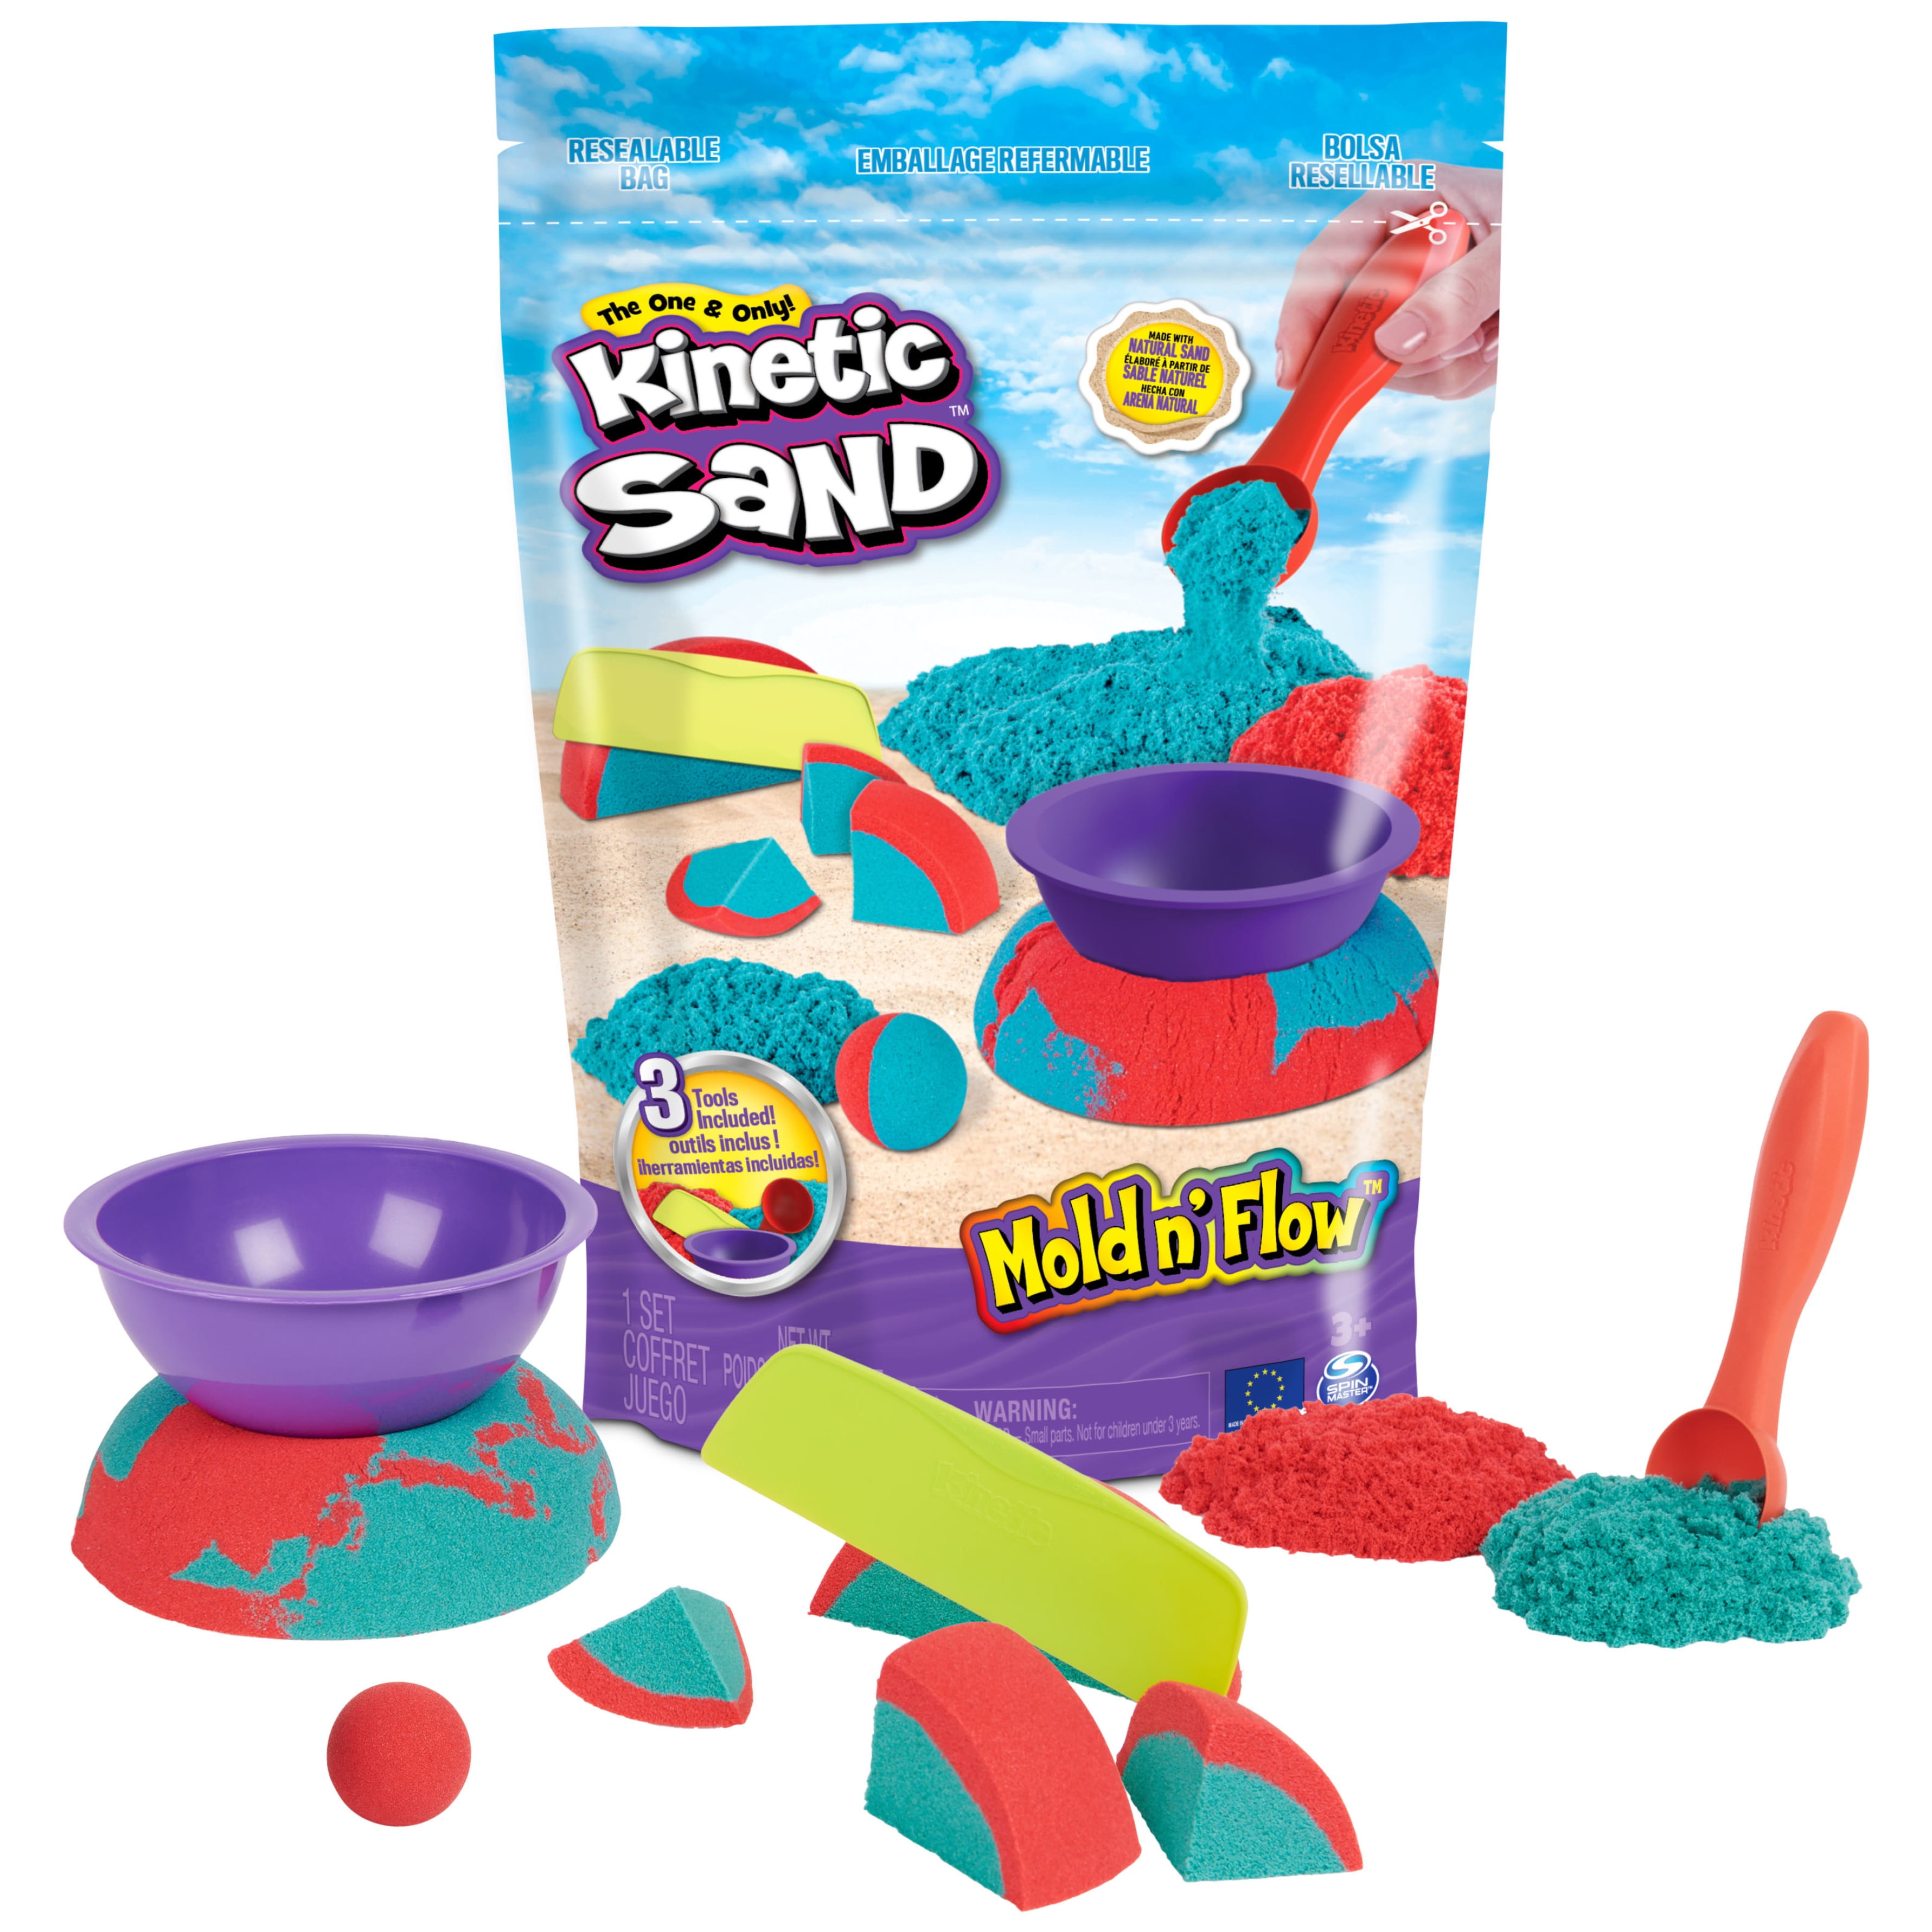  Kinetic Sand Ultimate Sandisfying Set, 2lb of Pink, Yellow and  Teal Play Sand, 10 Molds and Tools, Sensory Toys, for Kids : Toys & Games